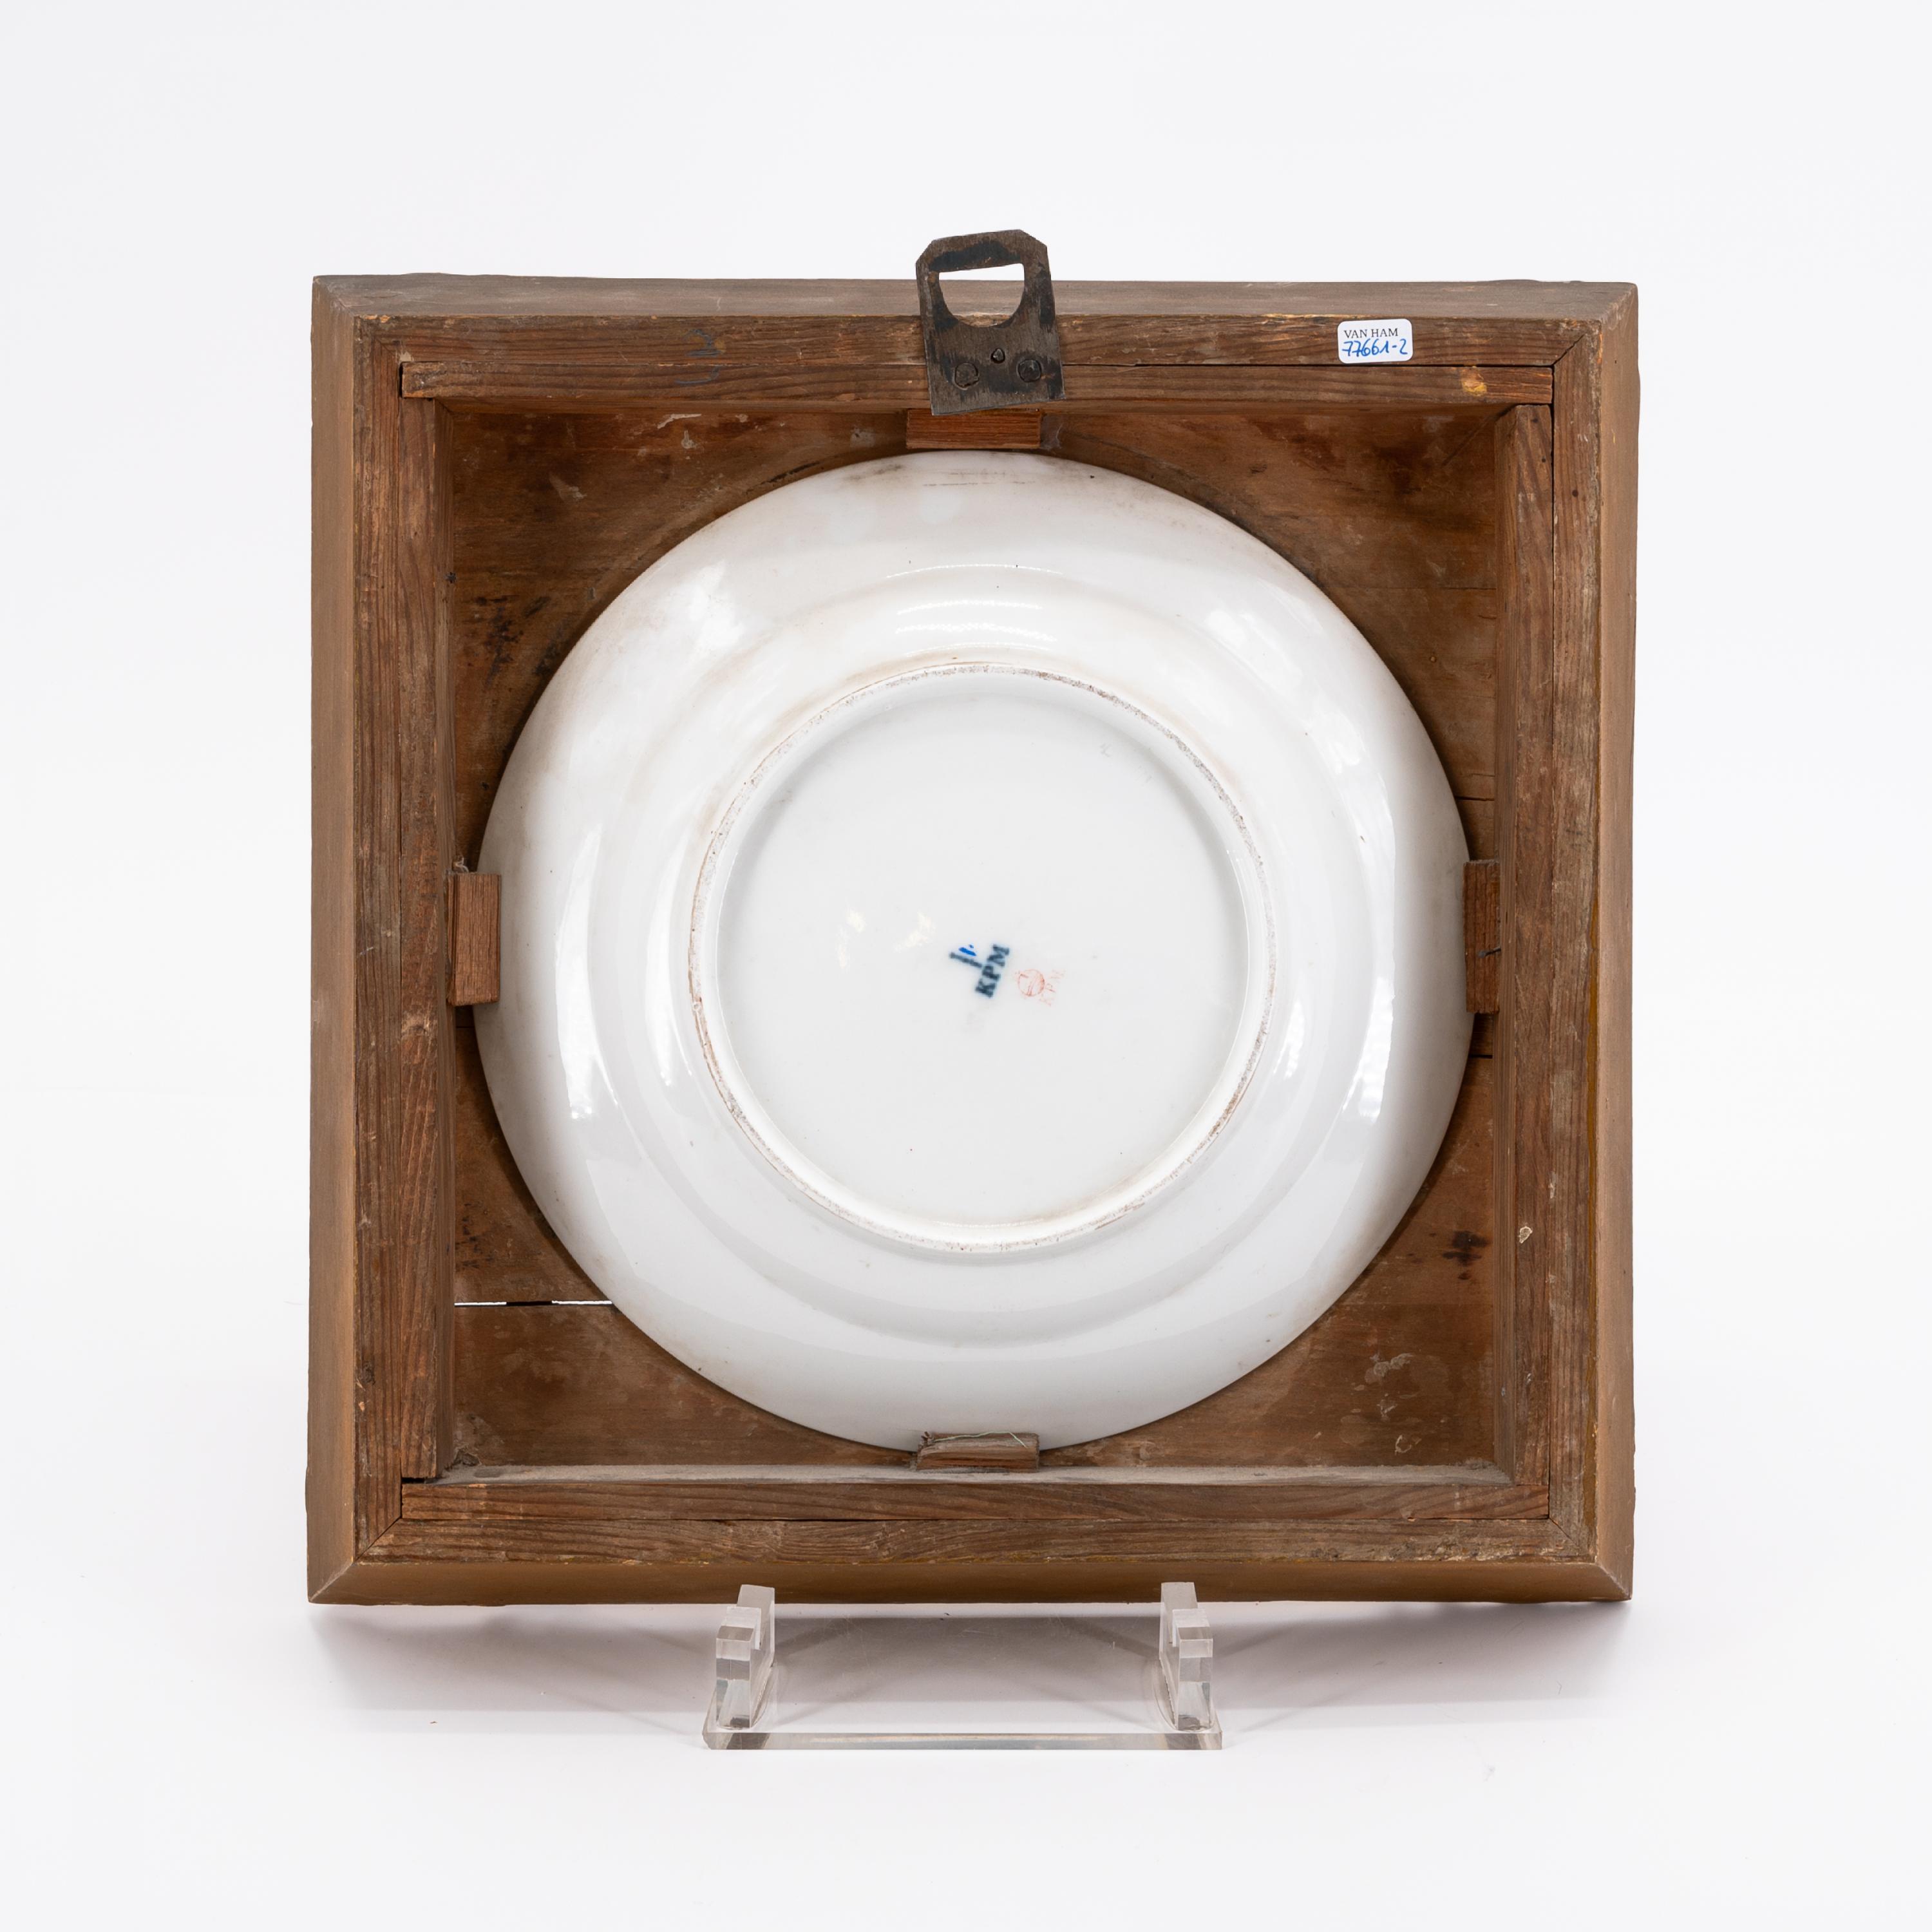 EXEPTIONAL SERIES OF TWELVE PORCELAIN PLATES WITH ROMANTIC VIEWS OF THE RHINE - Image 18 of 26